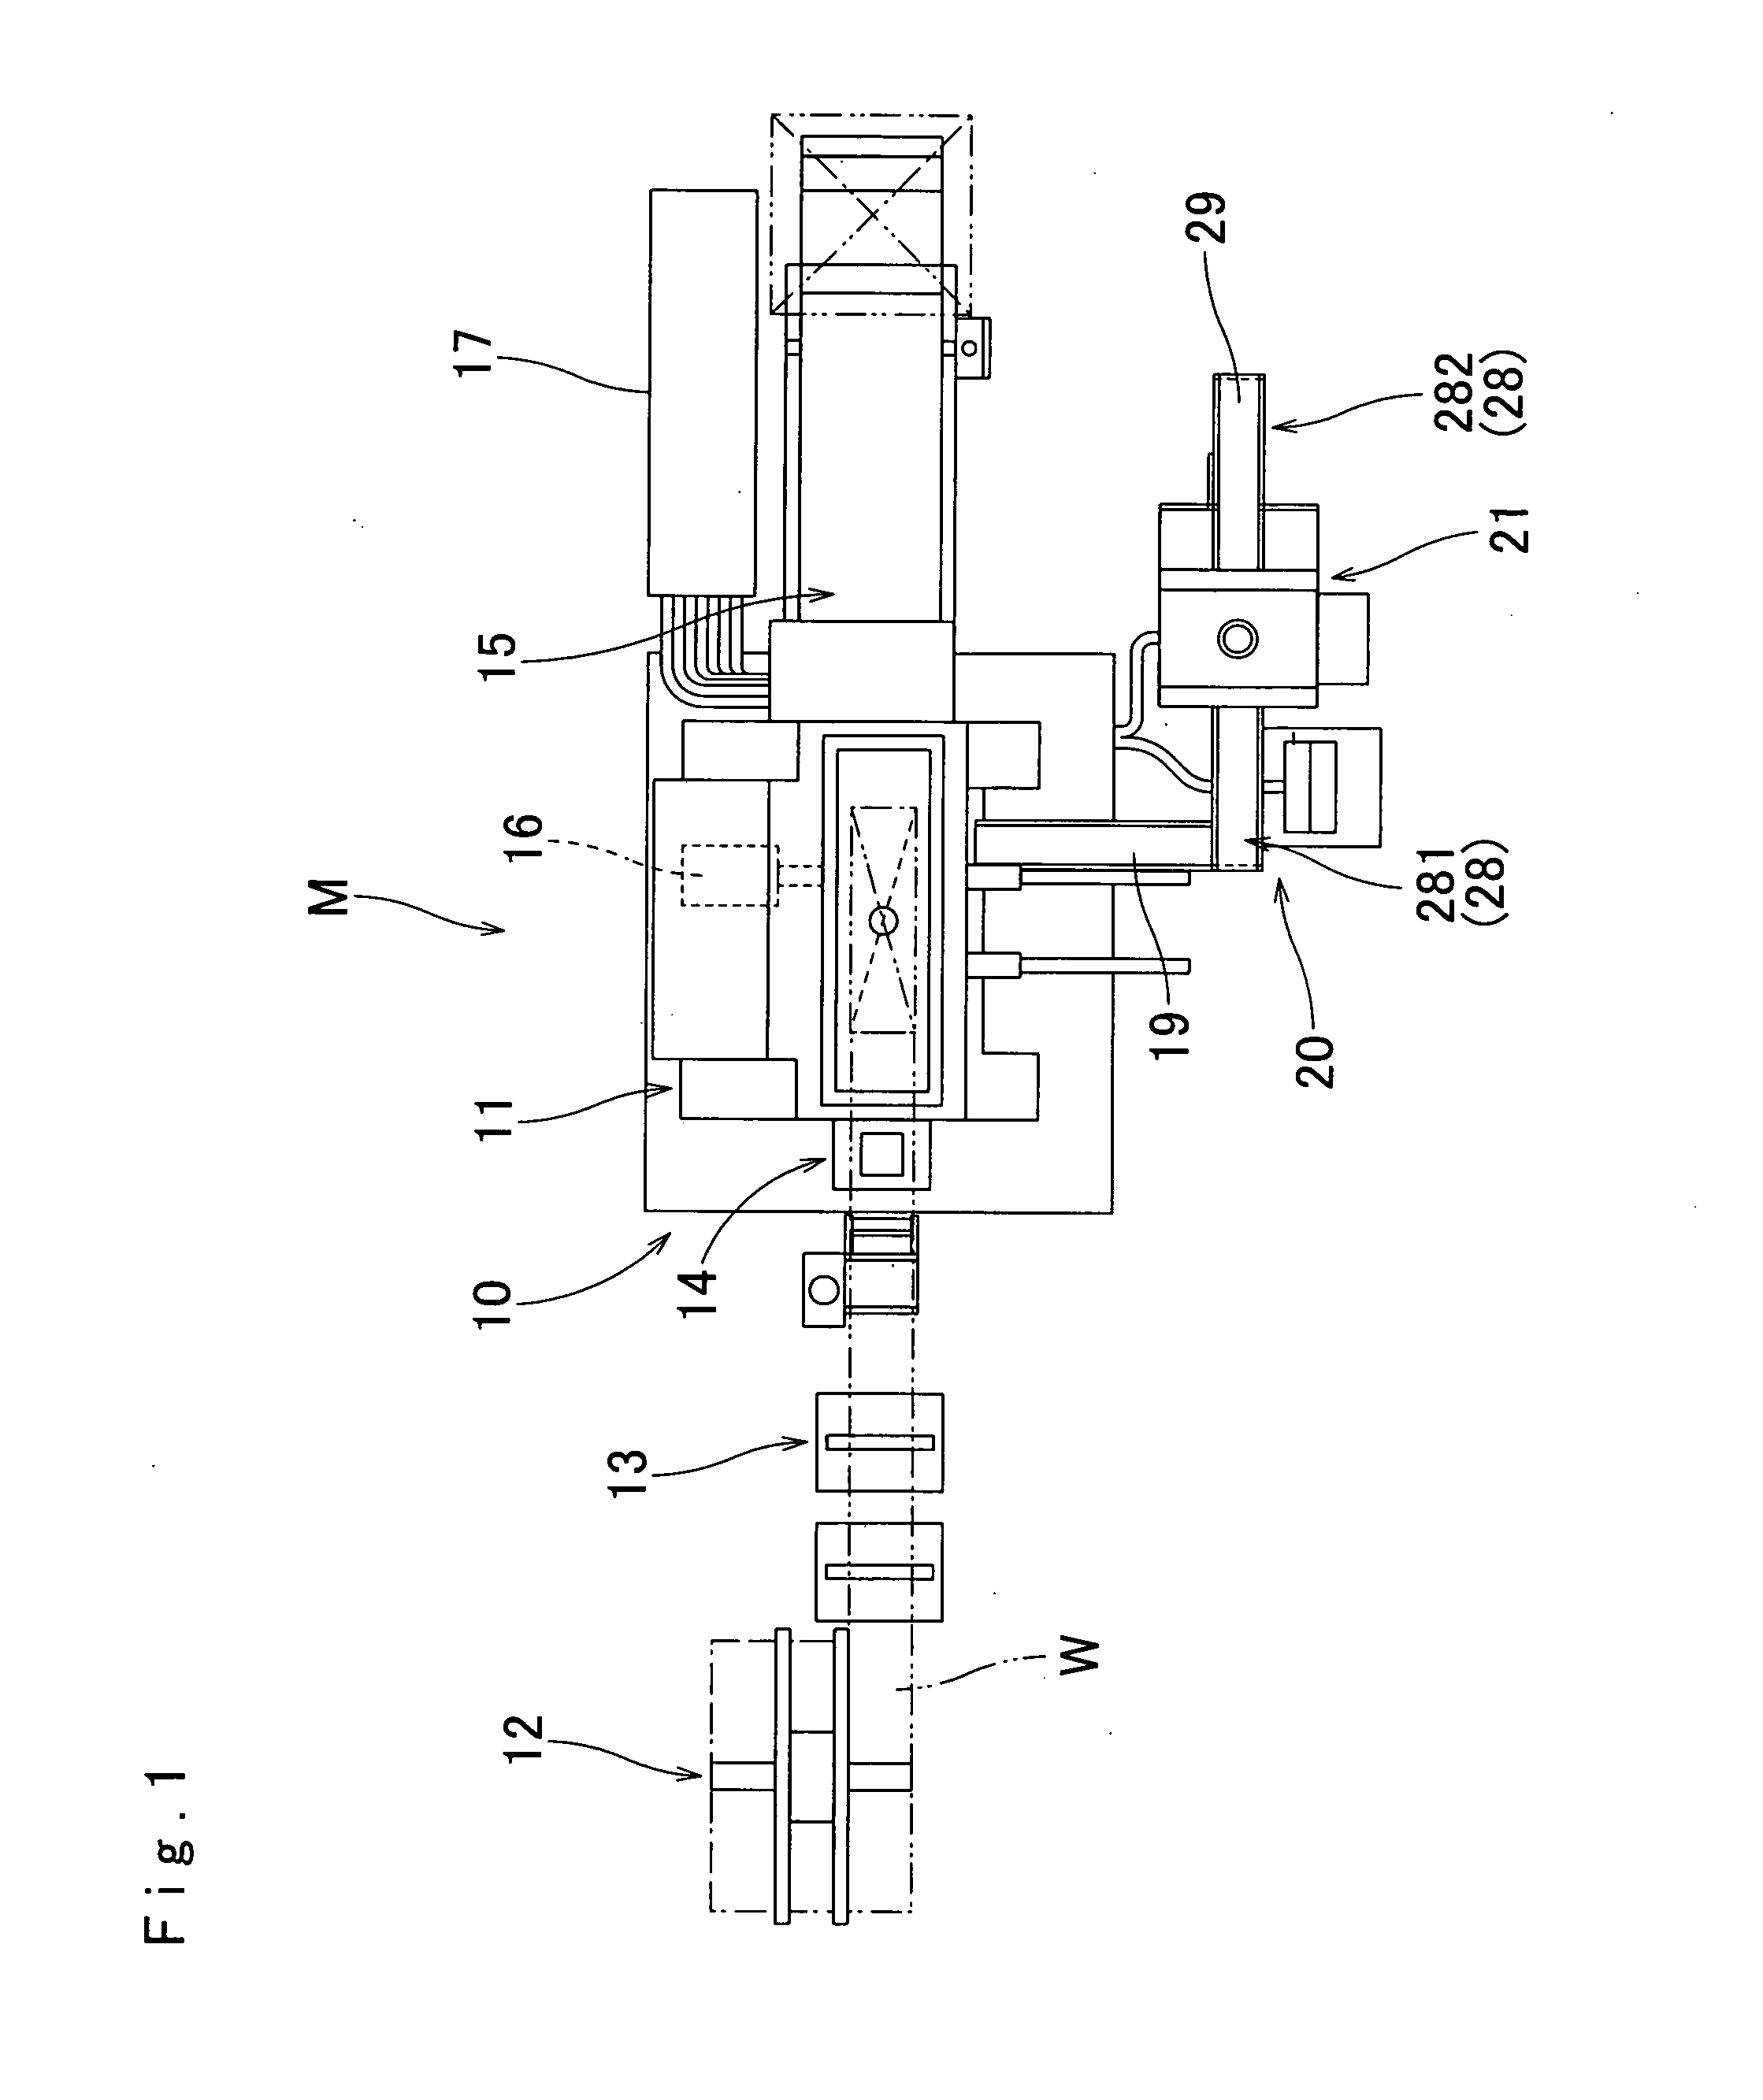 Method and production line for laminate assembly